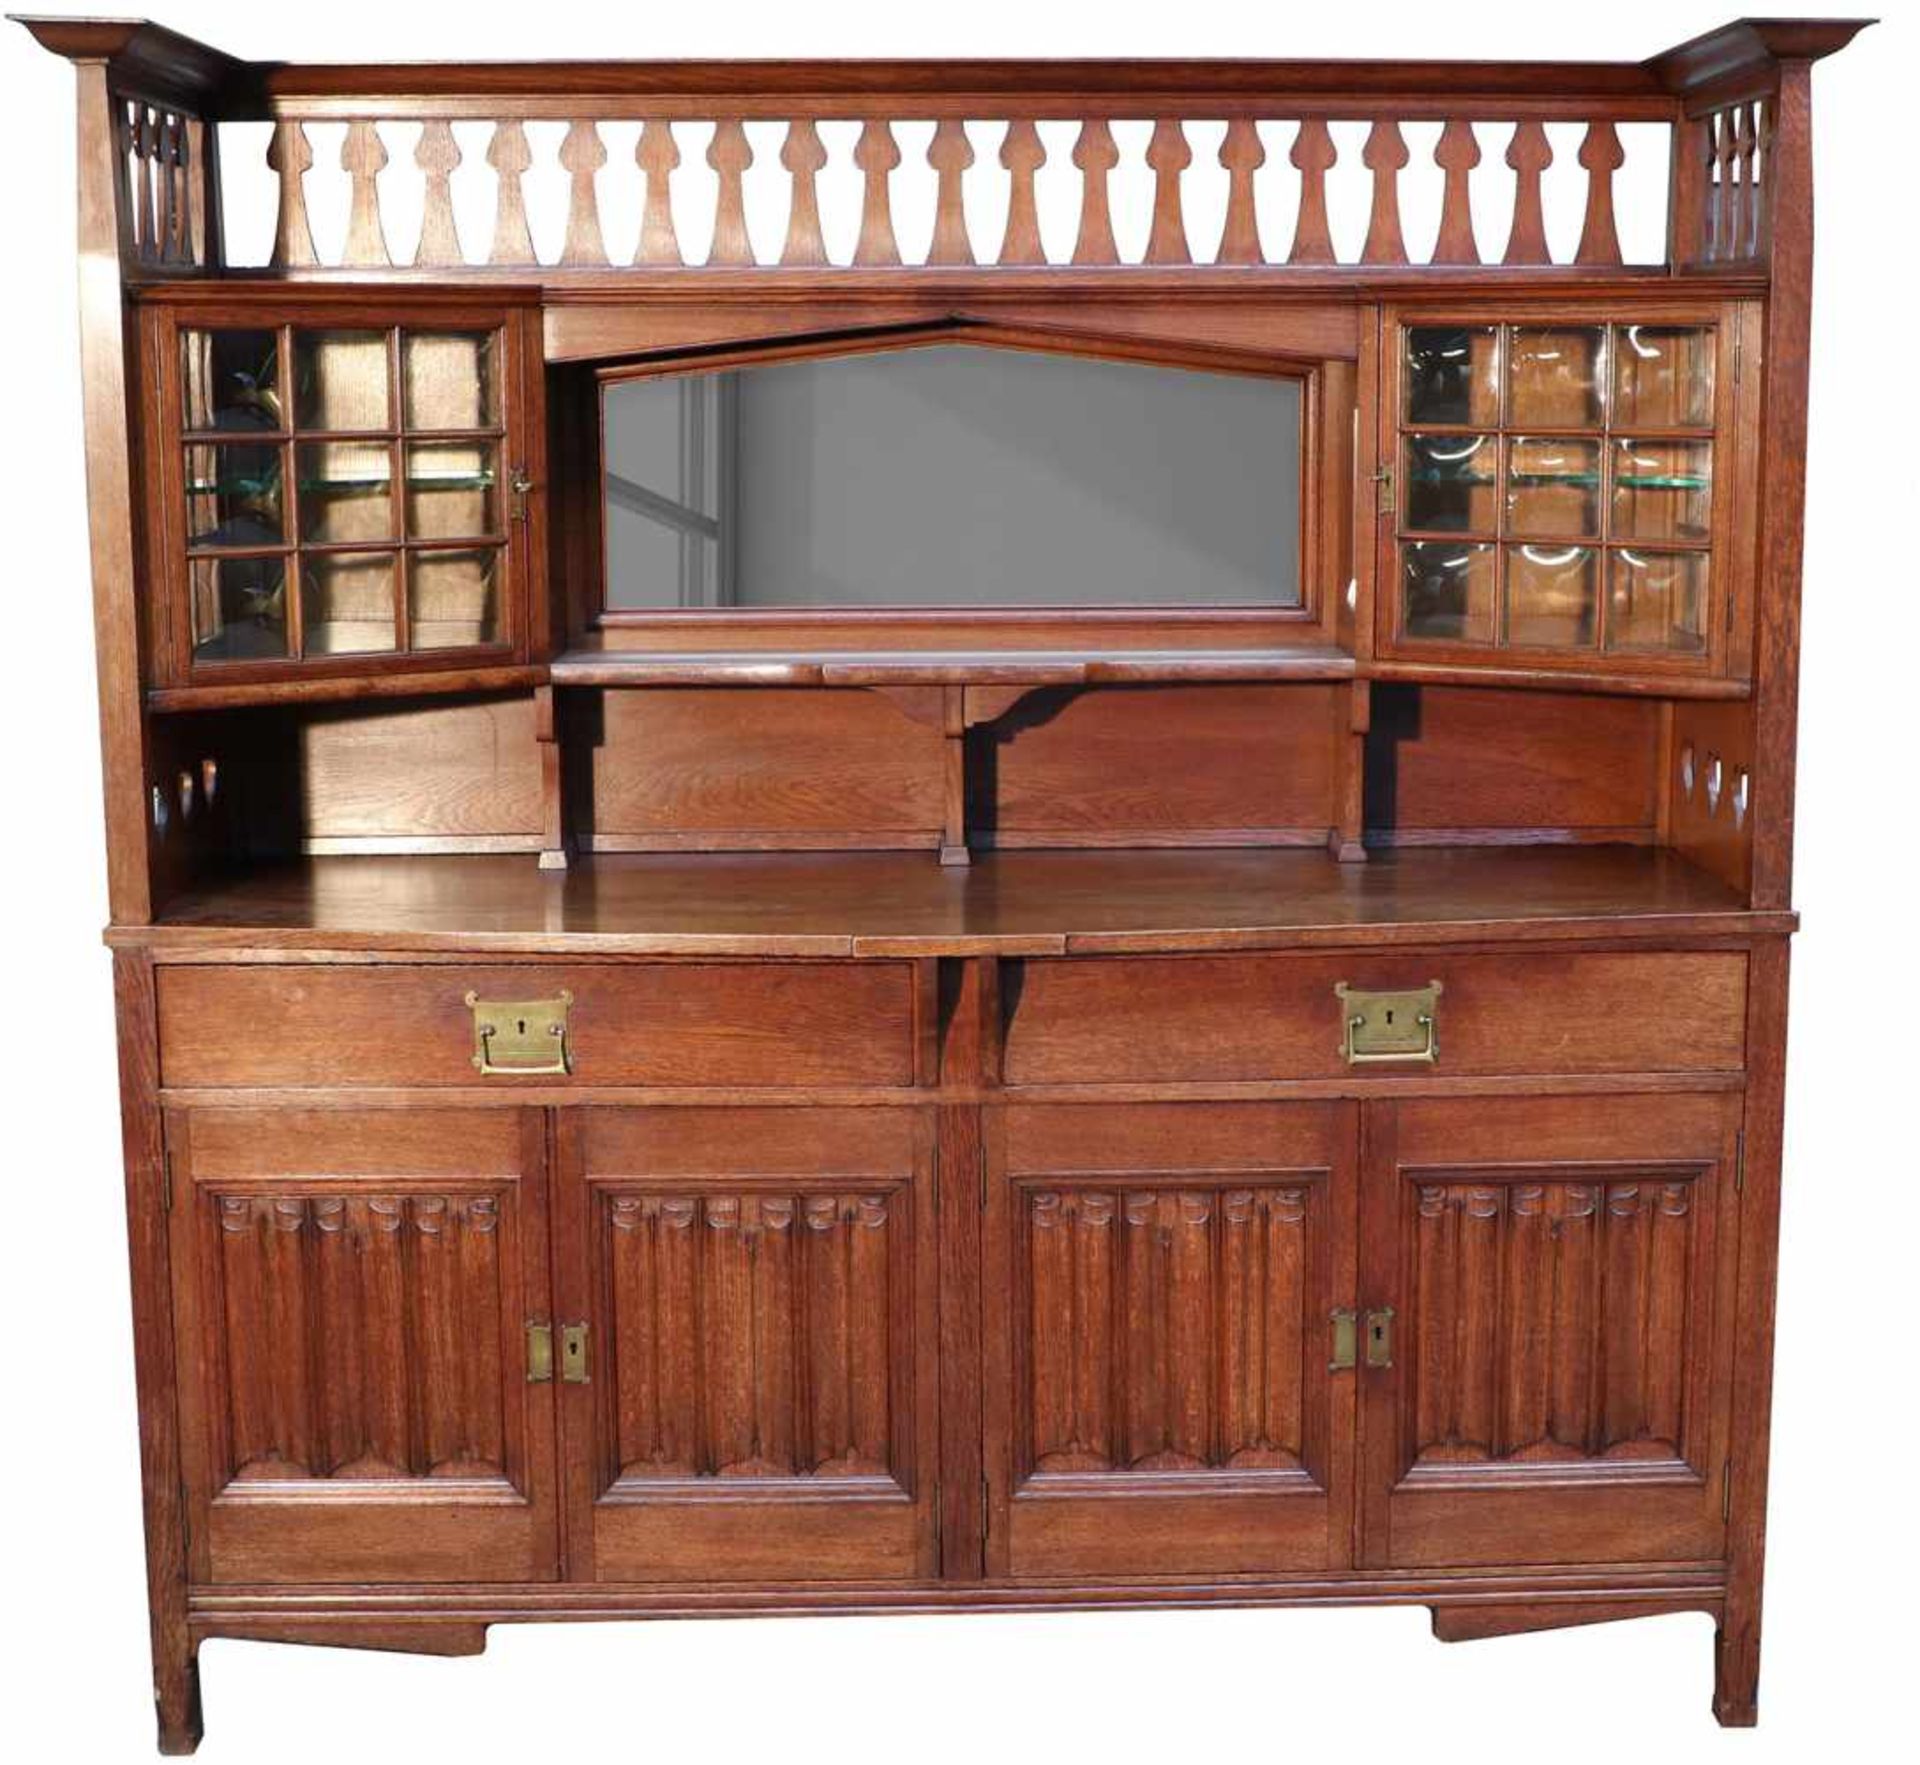 An Art Nouveau oakwood sideboard with glass- and carved linenfold panels. Circa 1910.